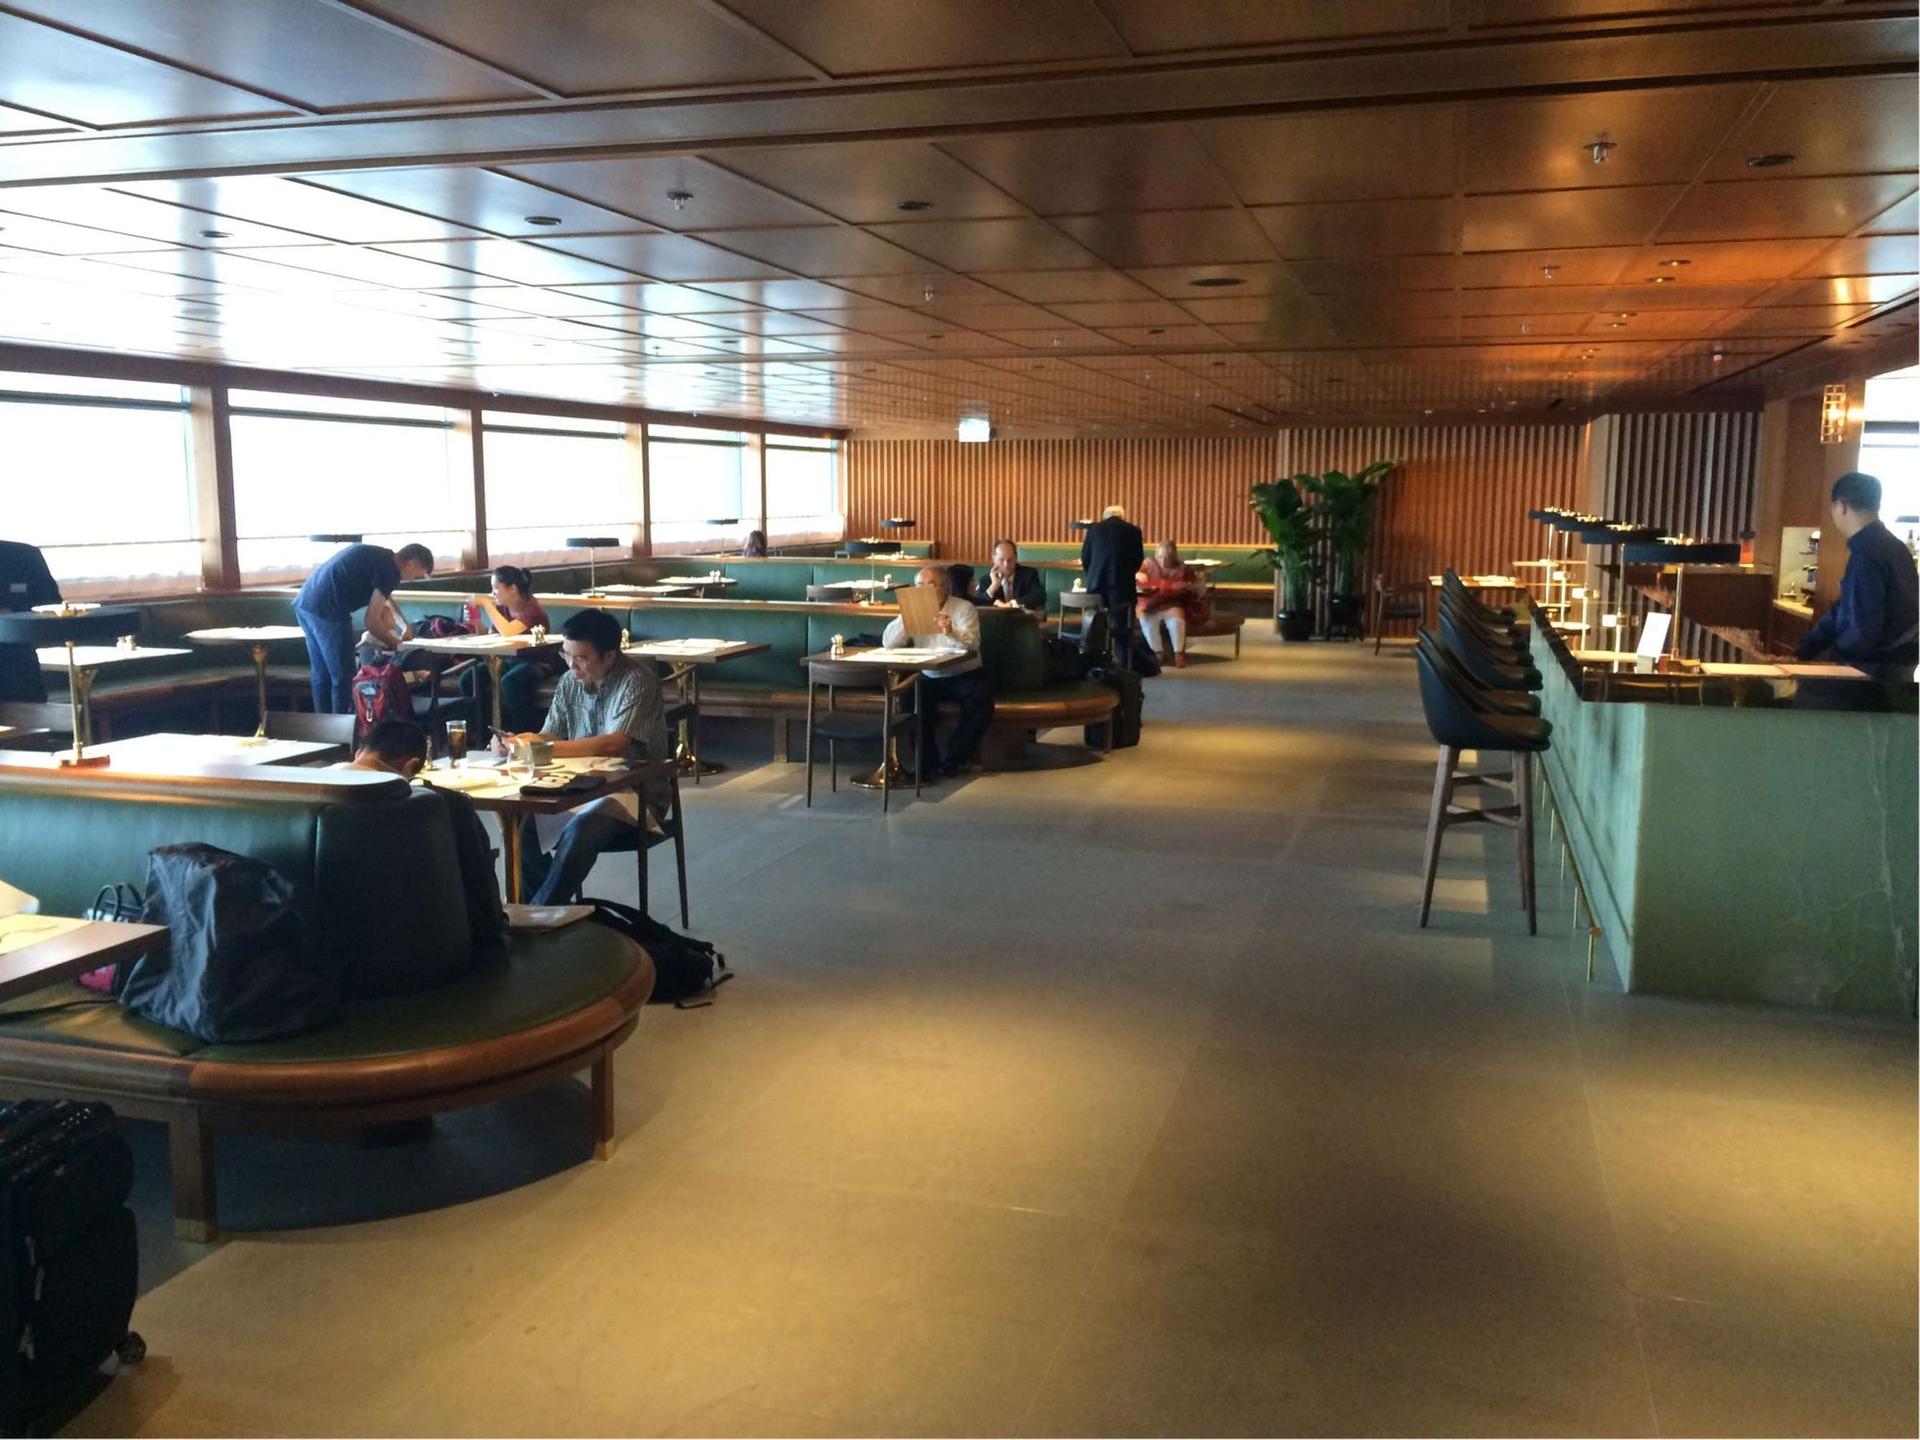 Cathay Pacific The Pier First Class Lounge image 29 of 100